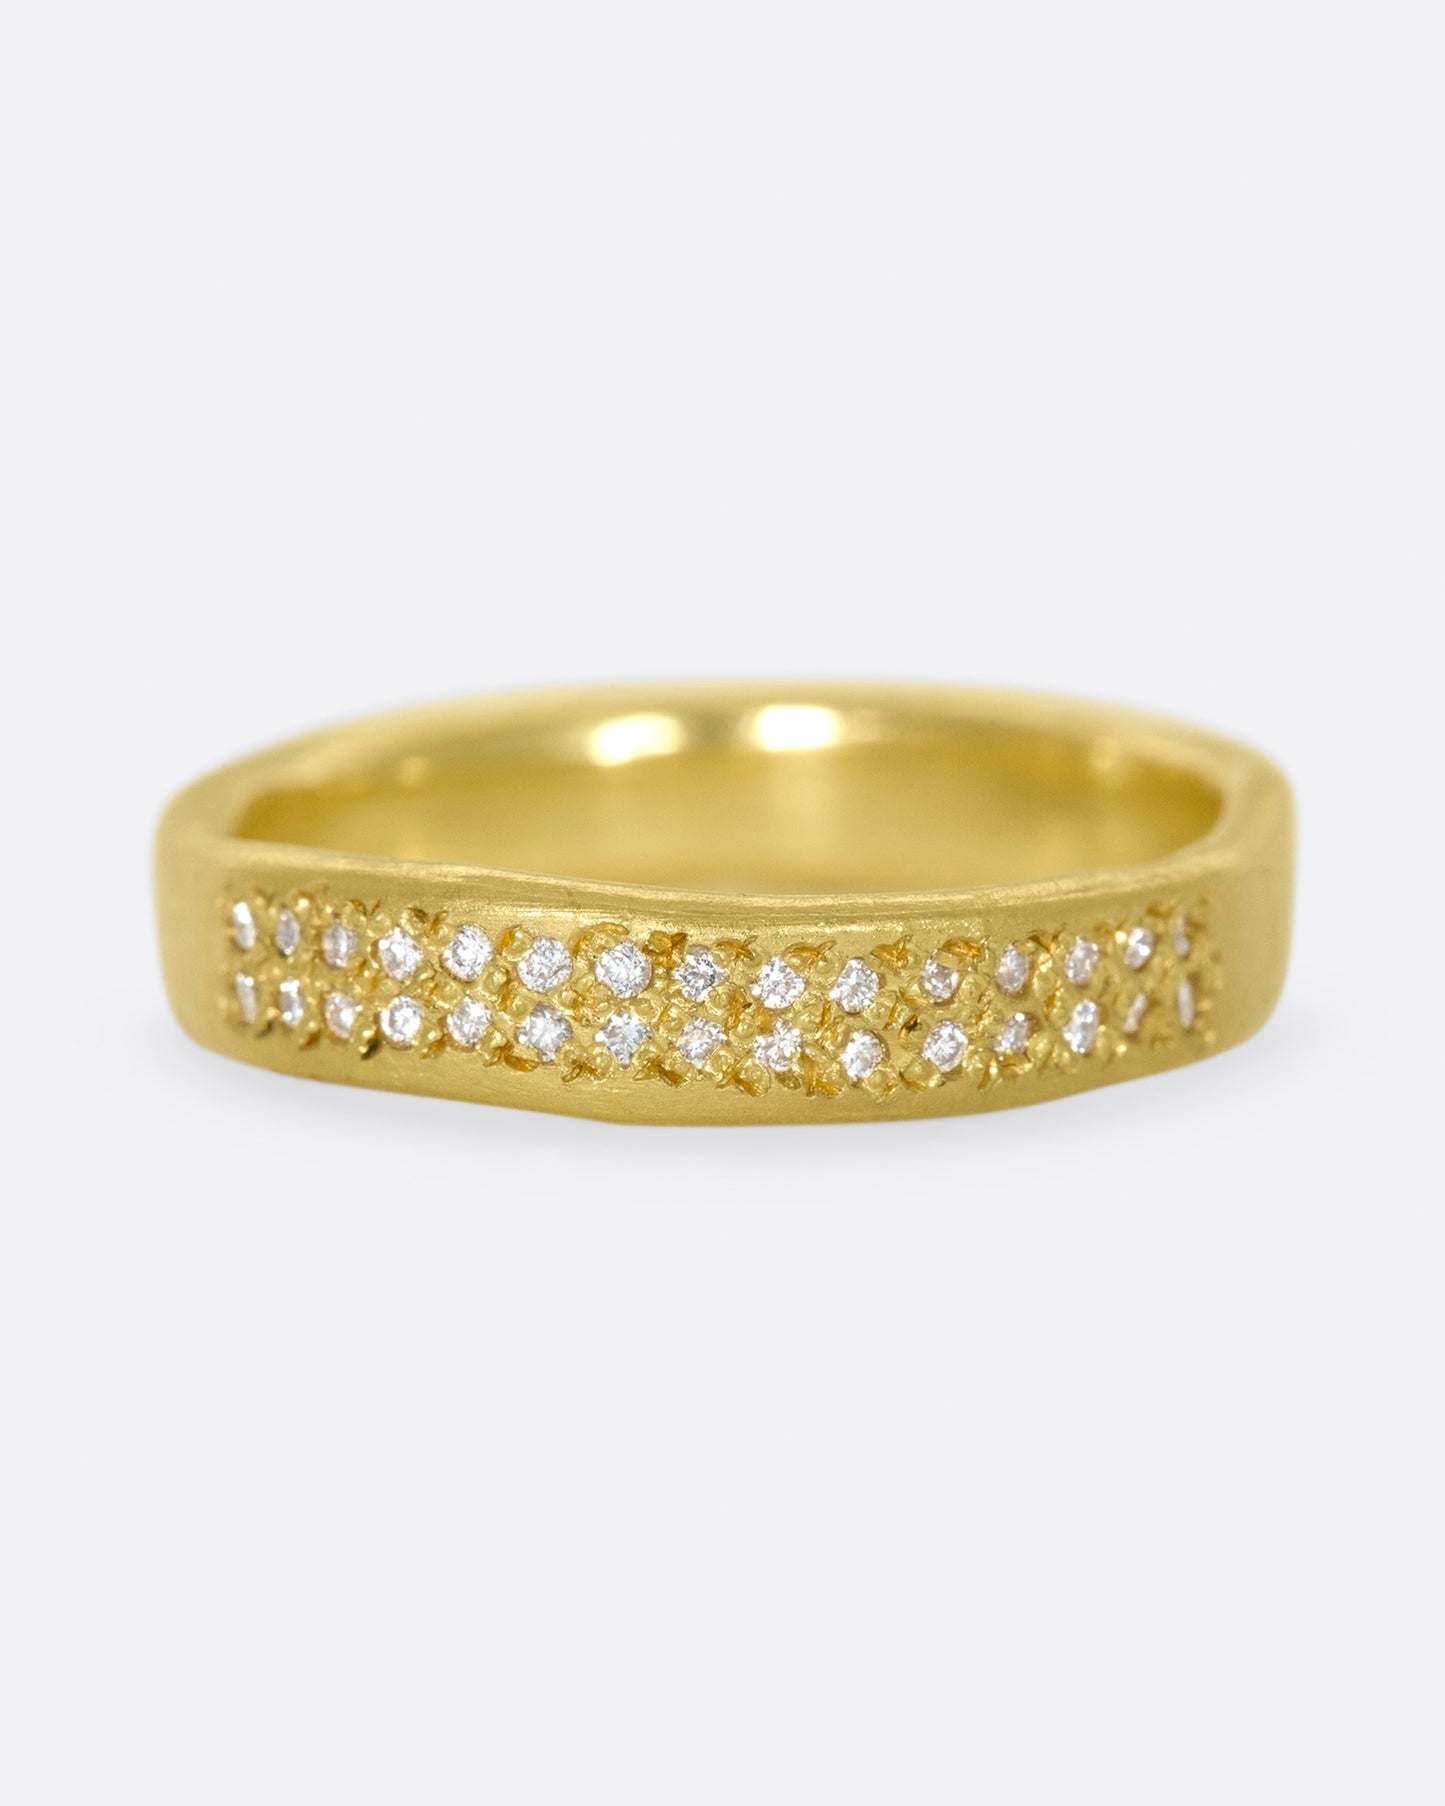 A hand-formed, brushed gold band with two rows of diamonds along half of it.